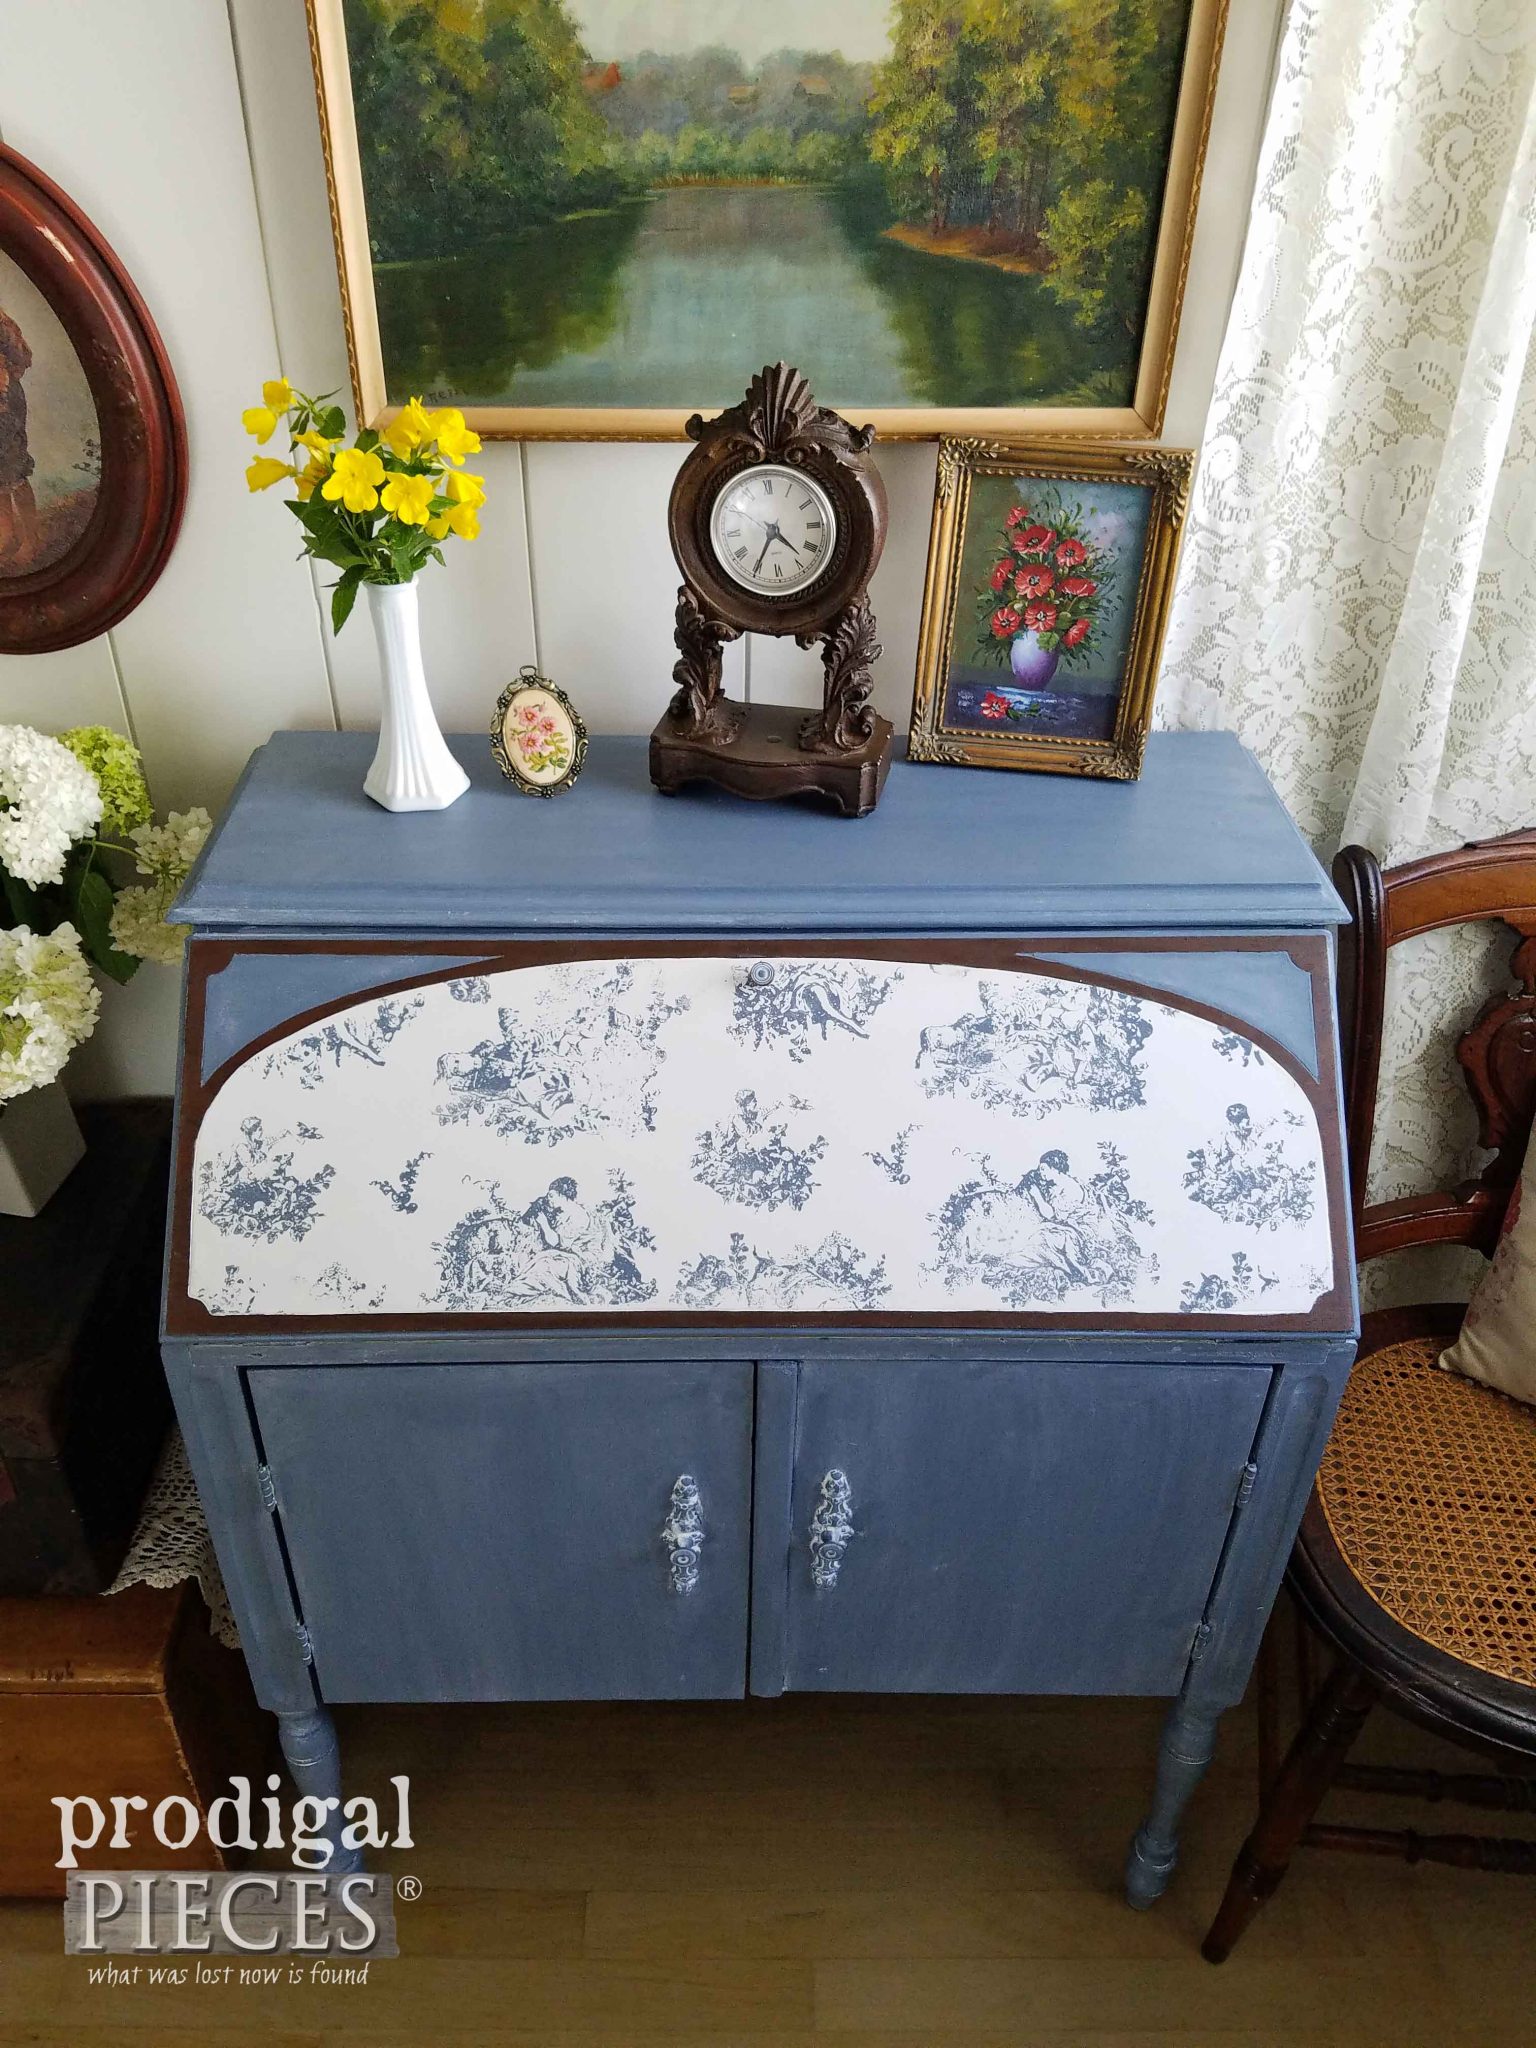 Toile Stamped Desk Created using Iron Orchid Designs Products by Prodigal Pieces | prodigalpieces.com